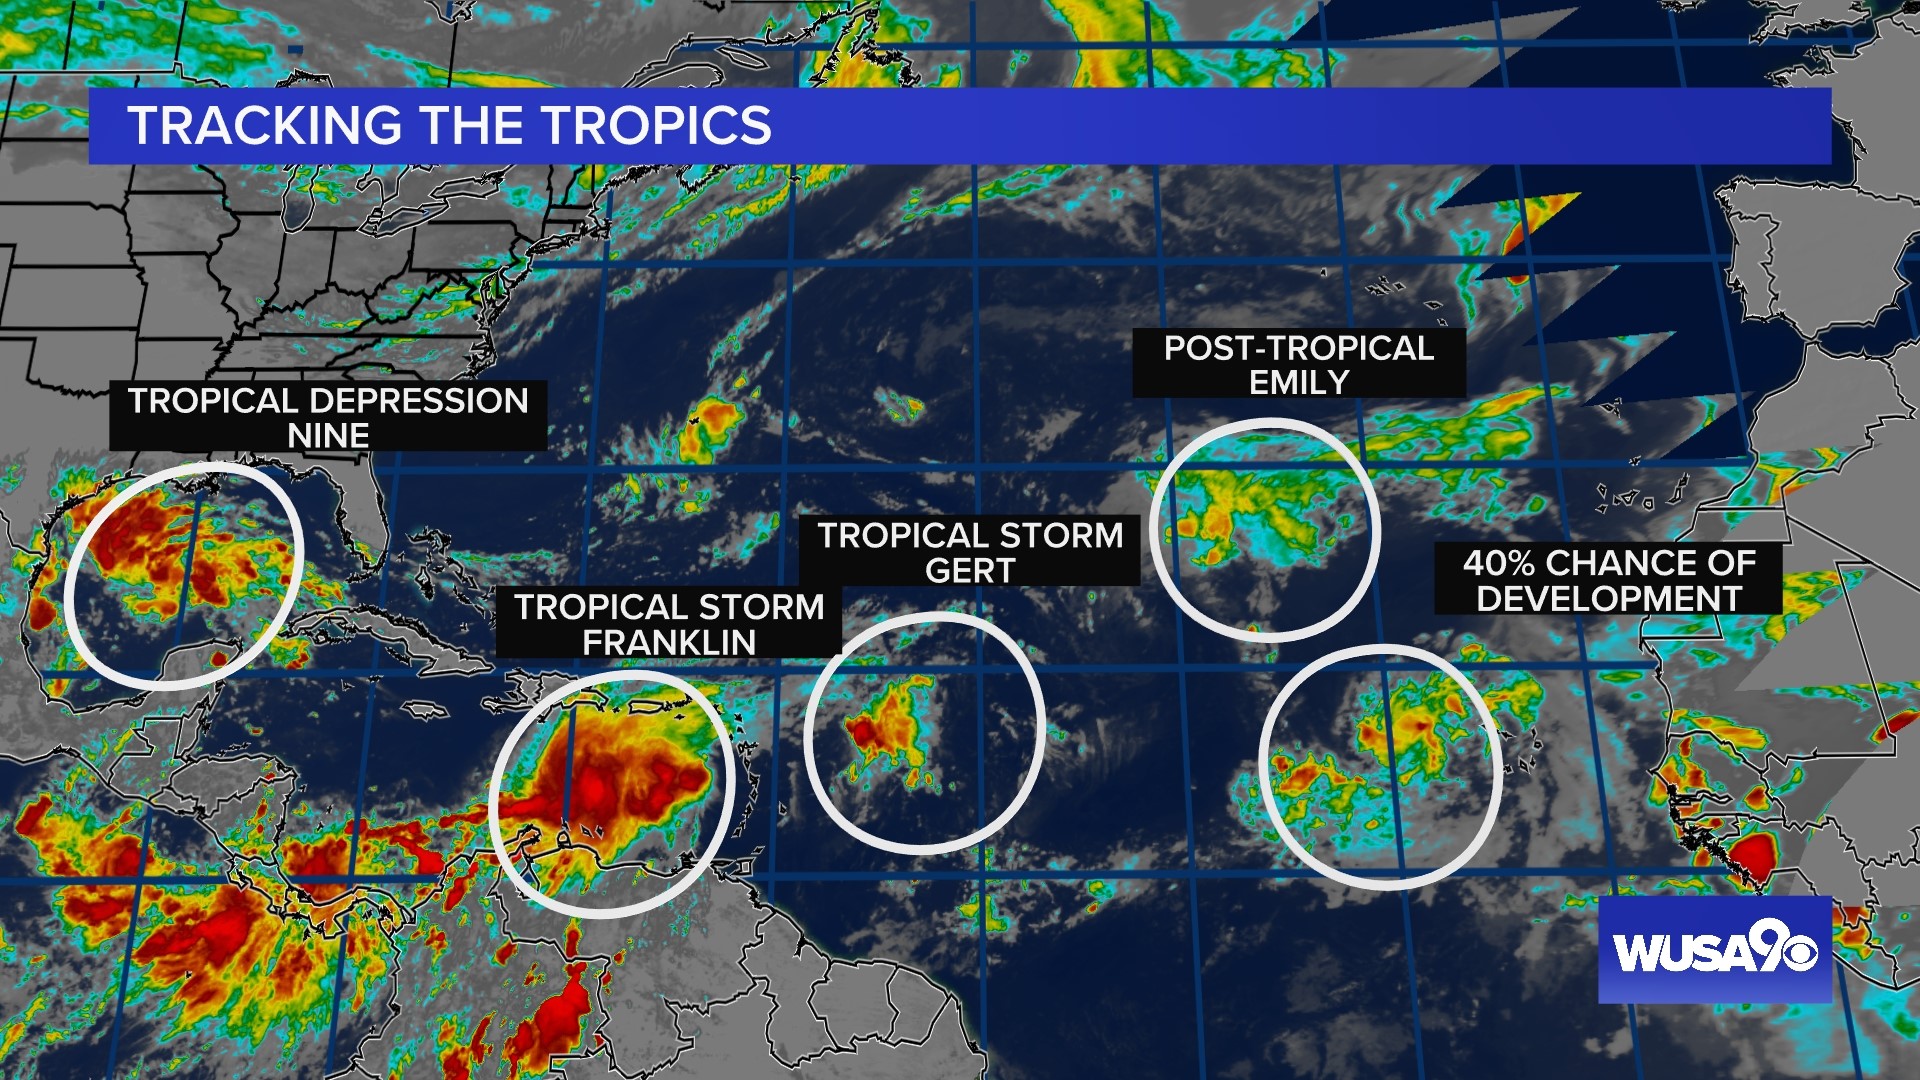 There have only been four named storms so far this season, but that's not necessarily an indication of what's to come.